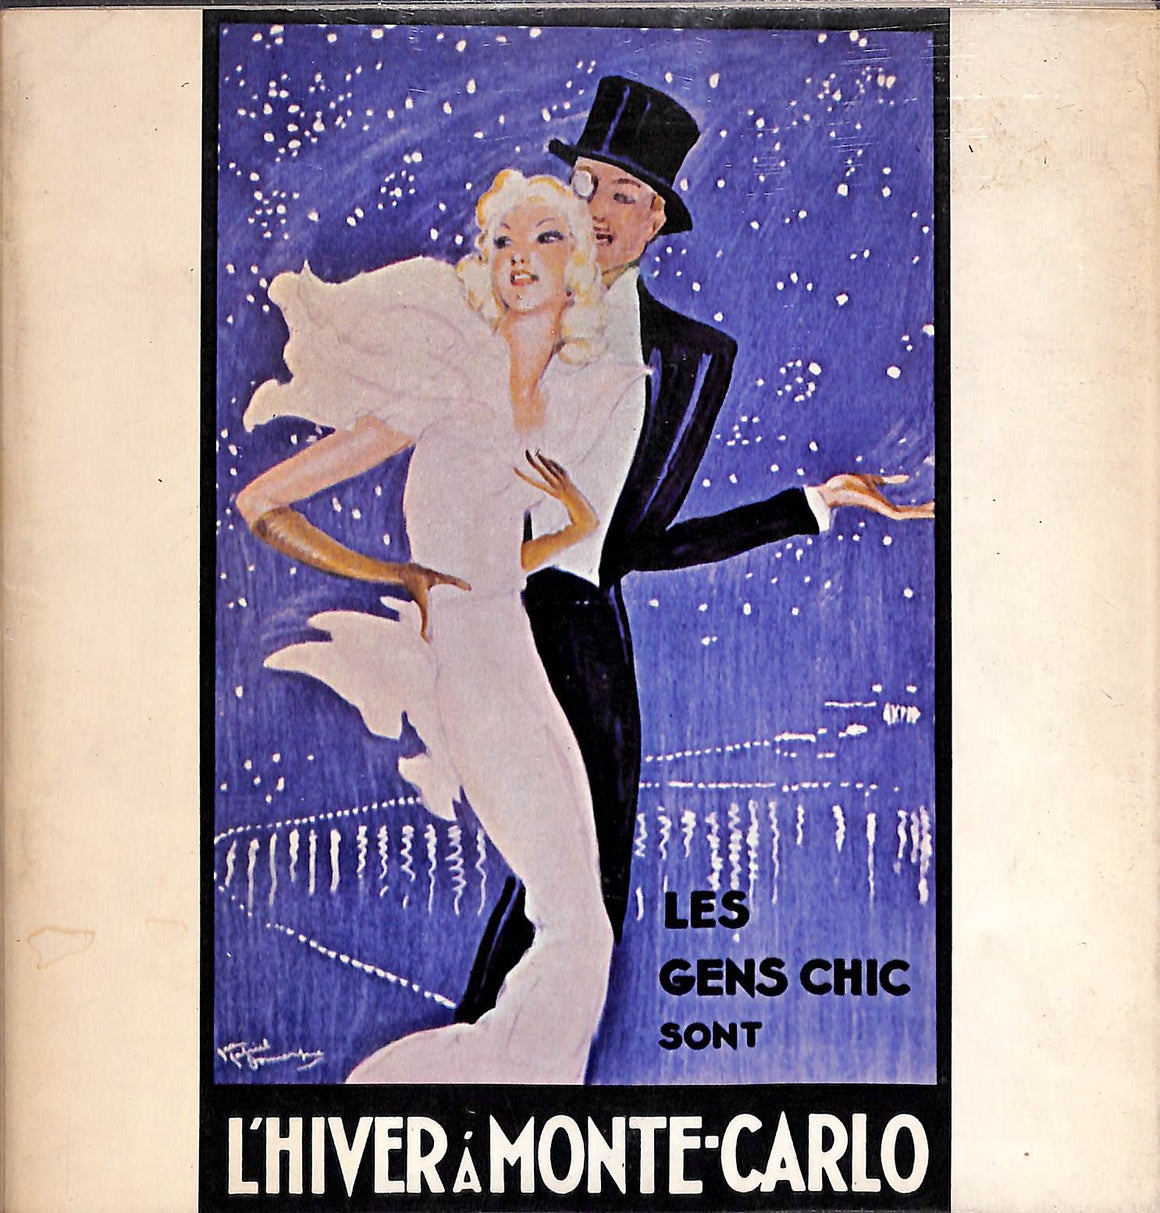 "A Night in Monte Carlo: December 1st, 1980"